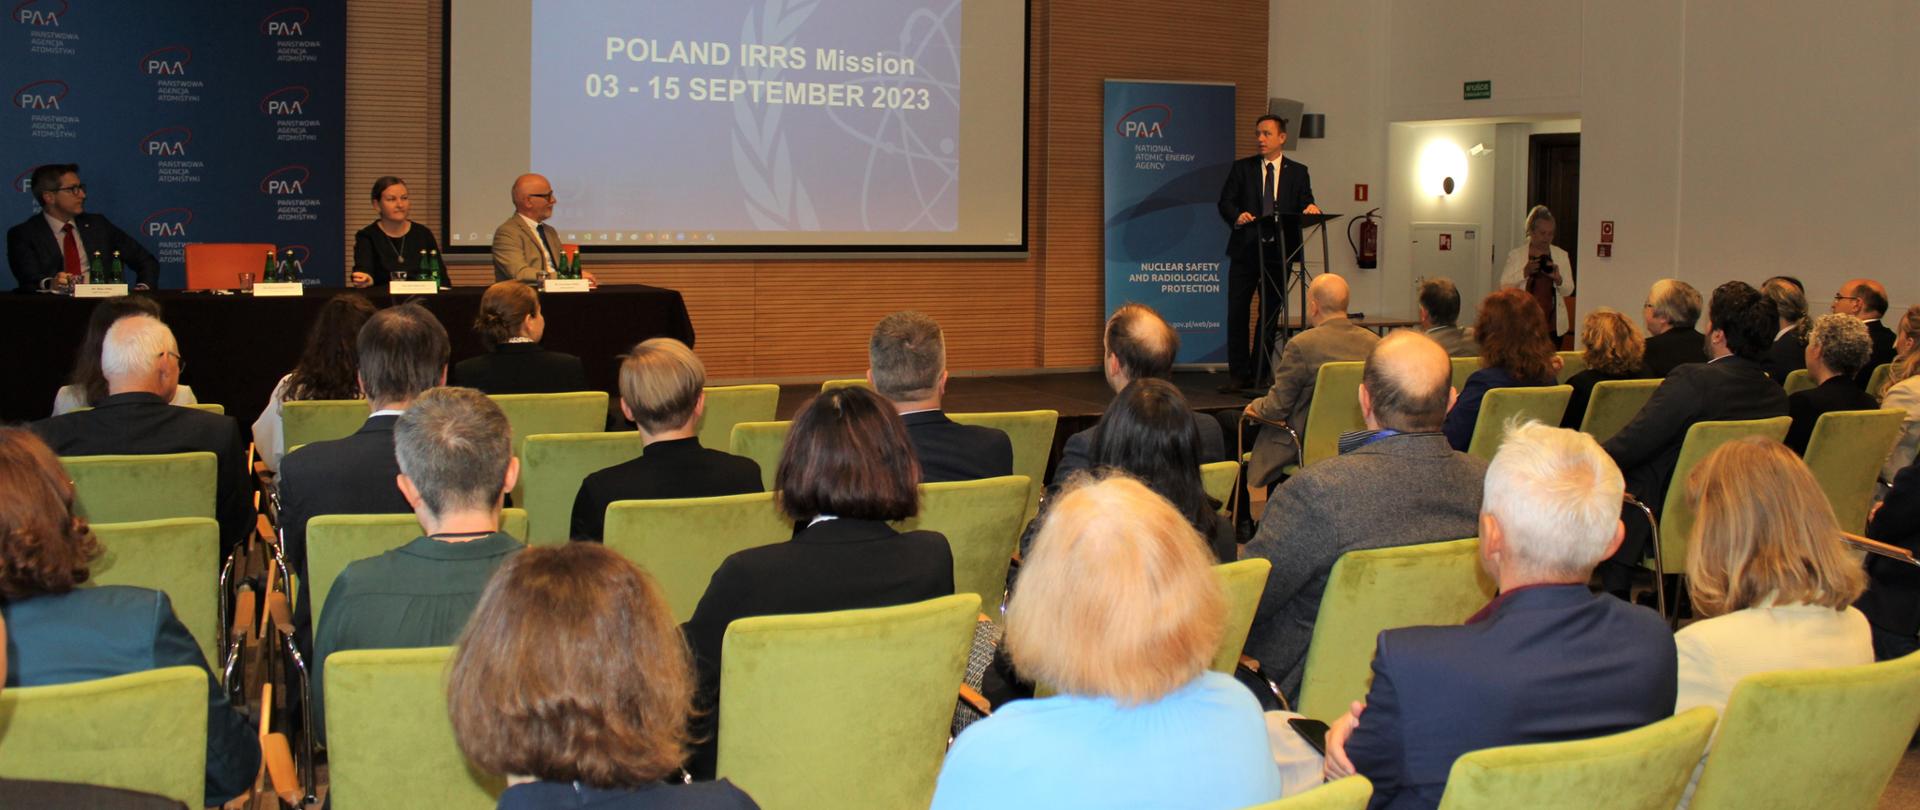 Poland IRRS Mission - President of the PAA speaks to the participants gathered in the room during exit meeting